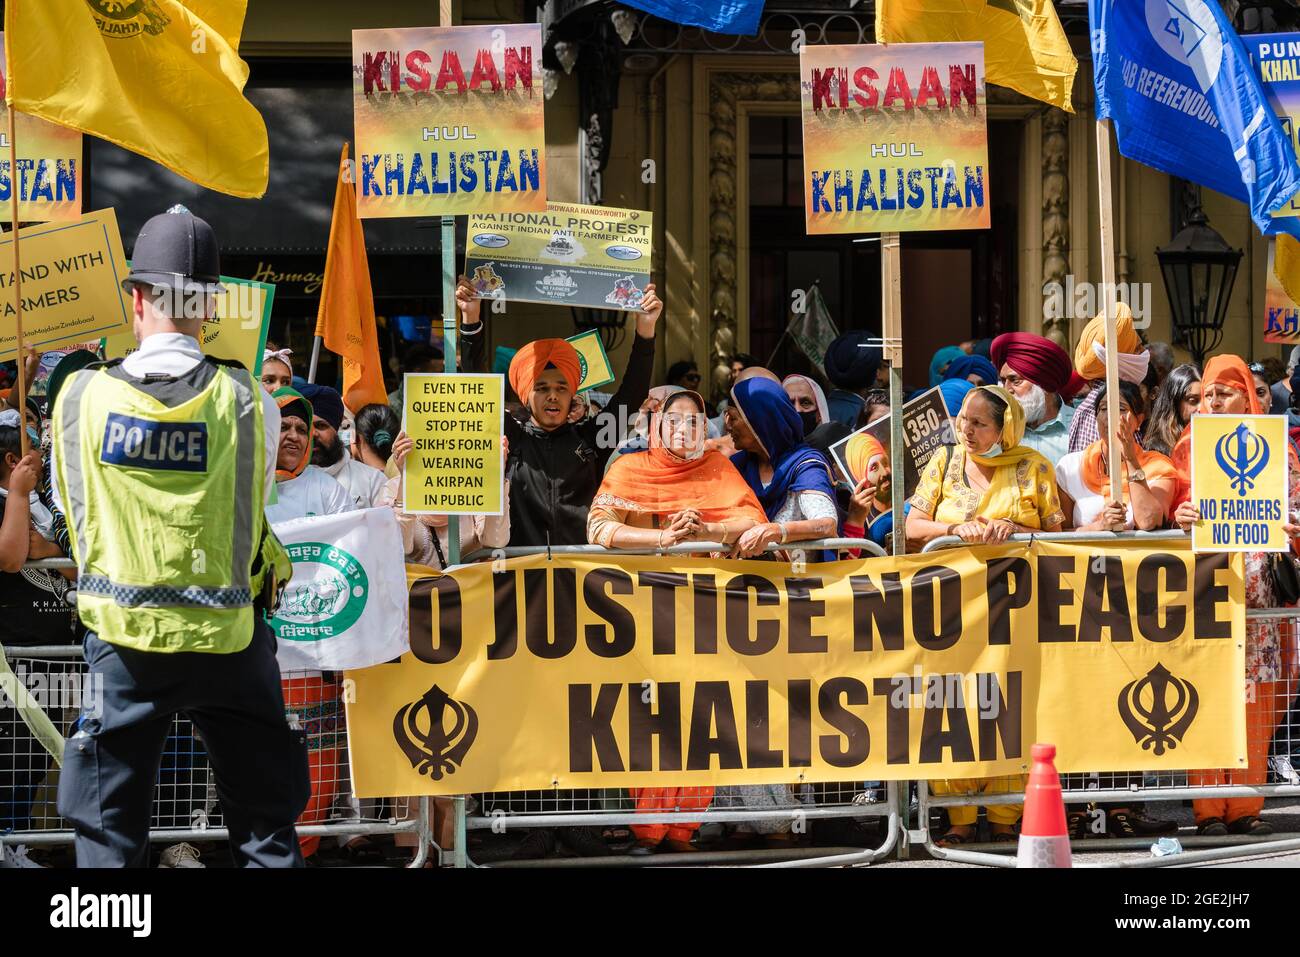 London, UK. 15 August 2021. Indian farmers protest outside India High Commission In solidarity with farmers from Punjab and across India. Stock Photo